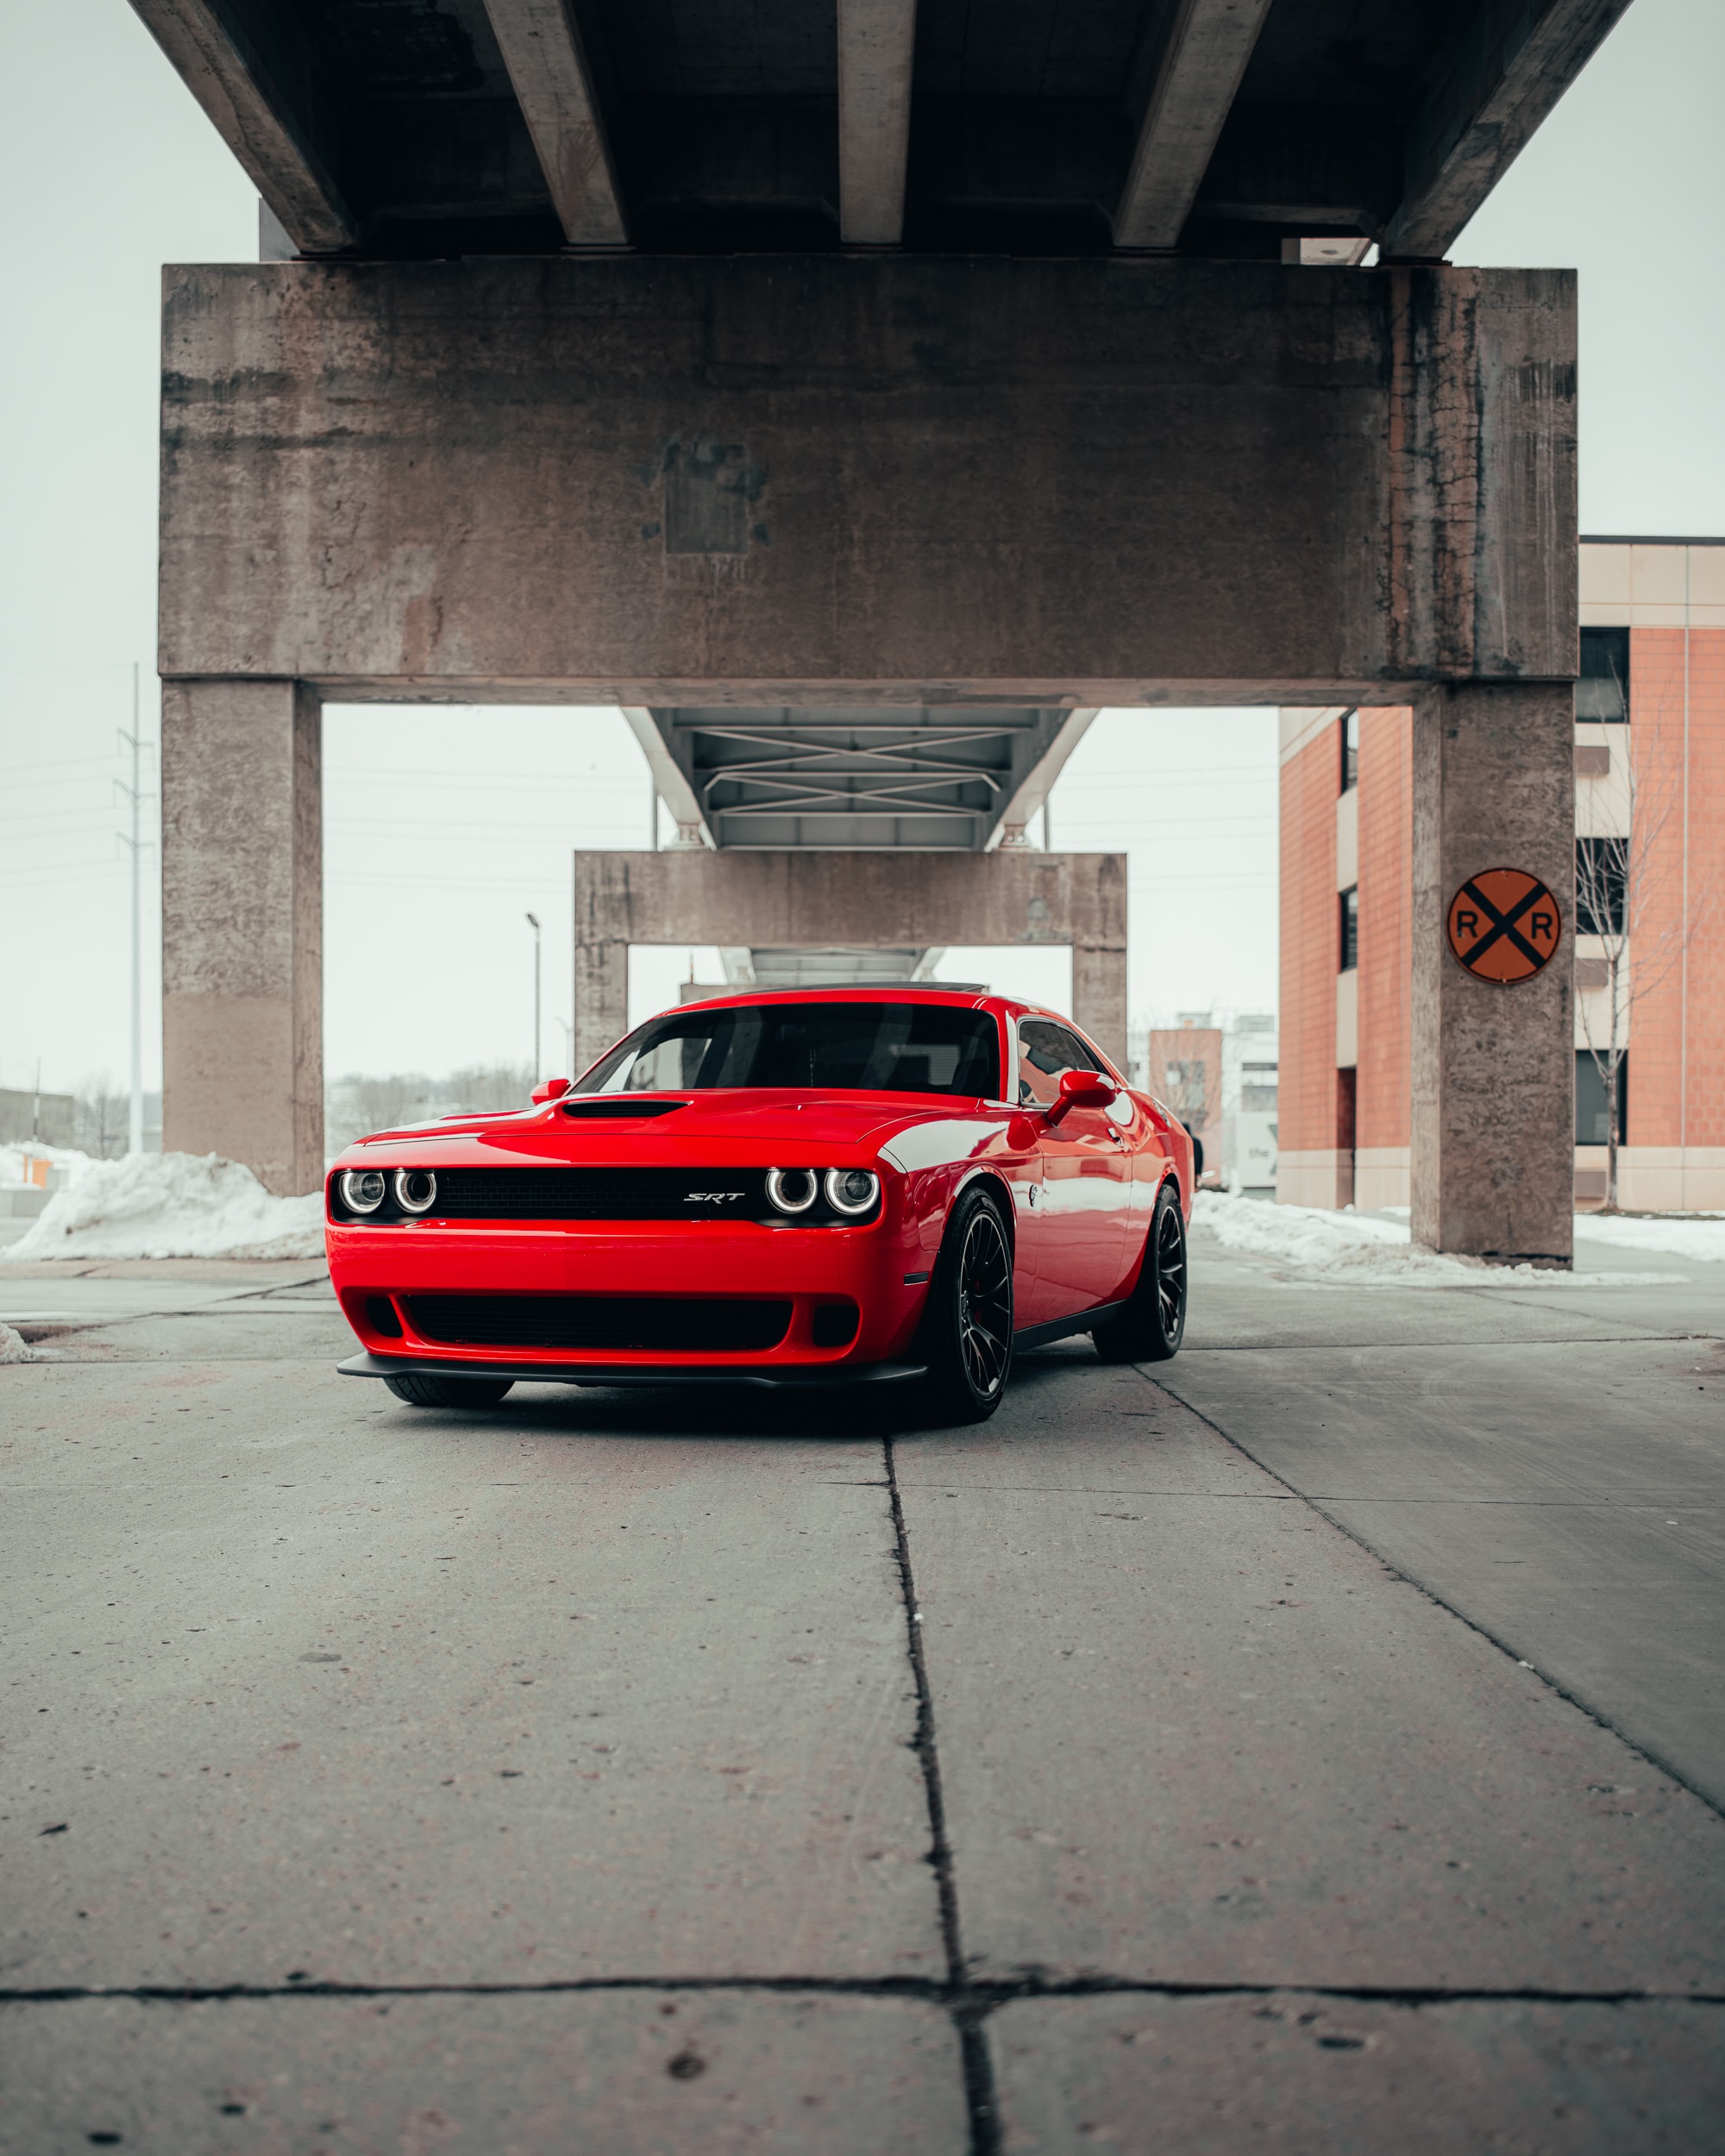 Cool Backgrounds sports car, car, red, dodge Front View